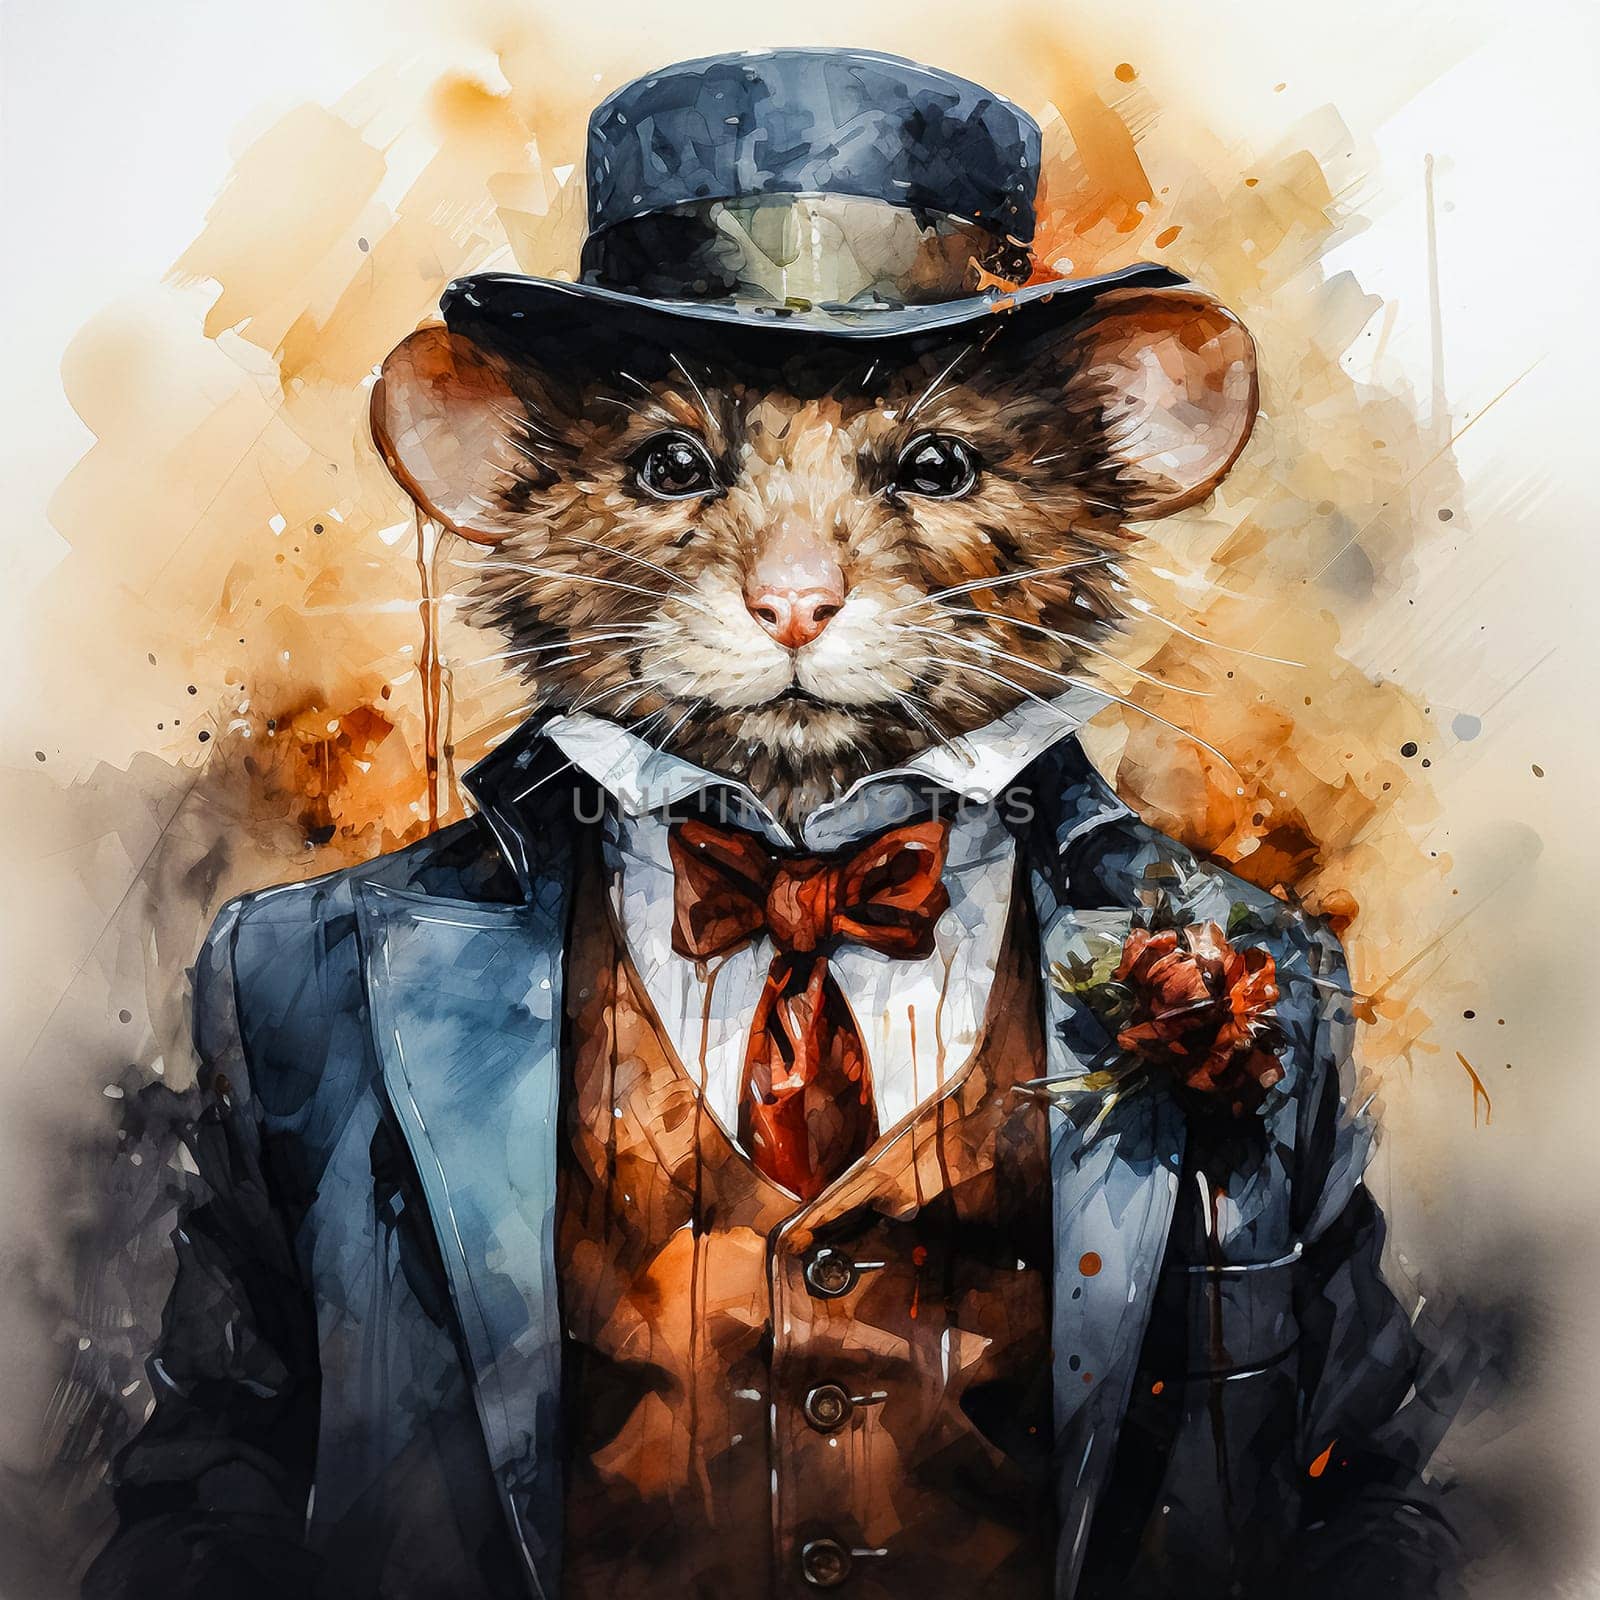 A business watercolor of a mouse in an elegant suit by Alla_Morozova93